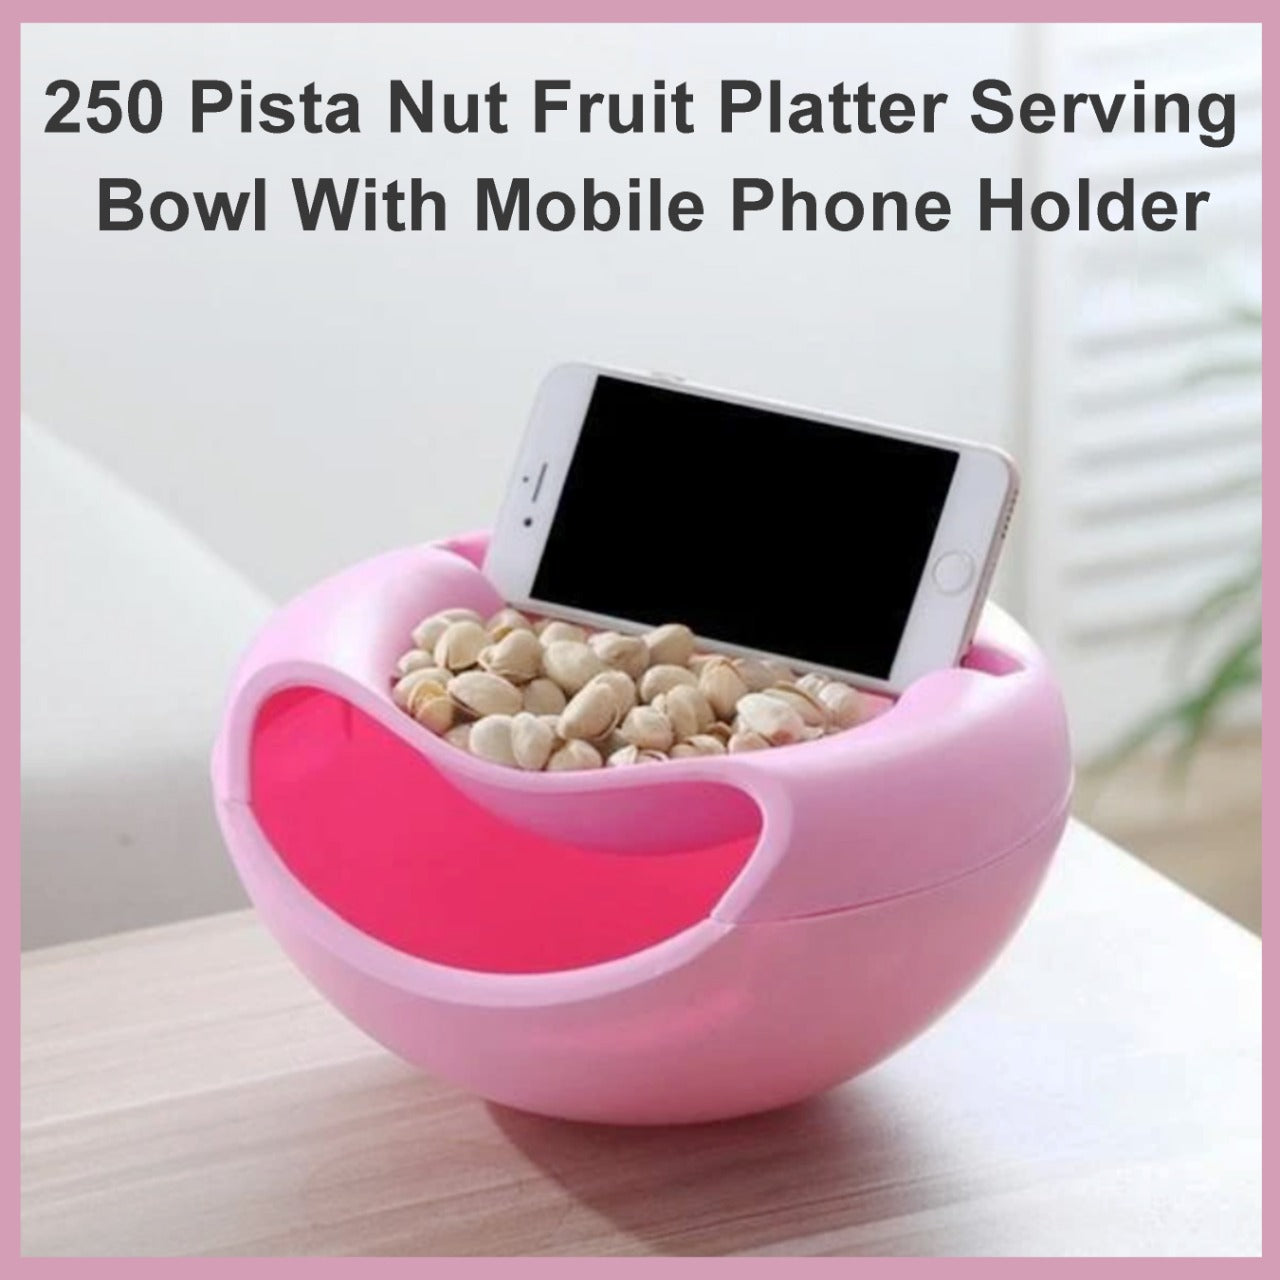 250 Pista Nut Fruit Platter Serving Bowl With Mobile Phone Holder by HomeFast Dukandaily